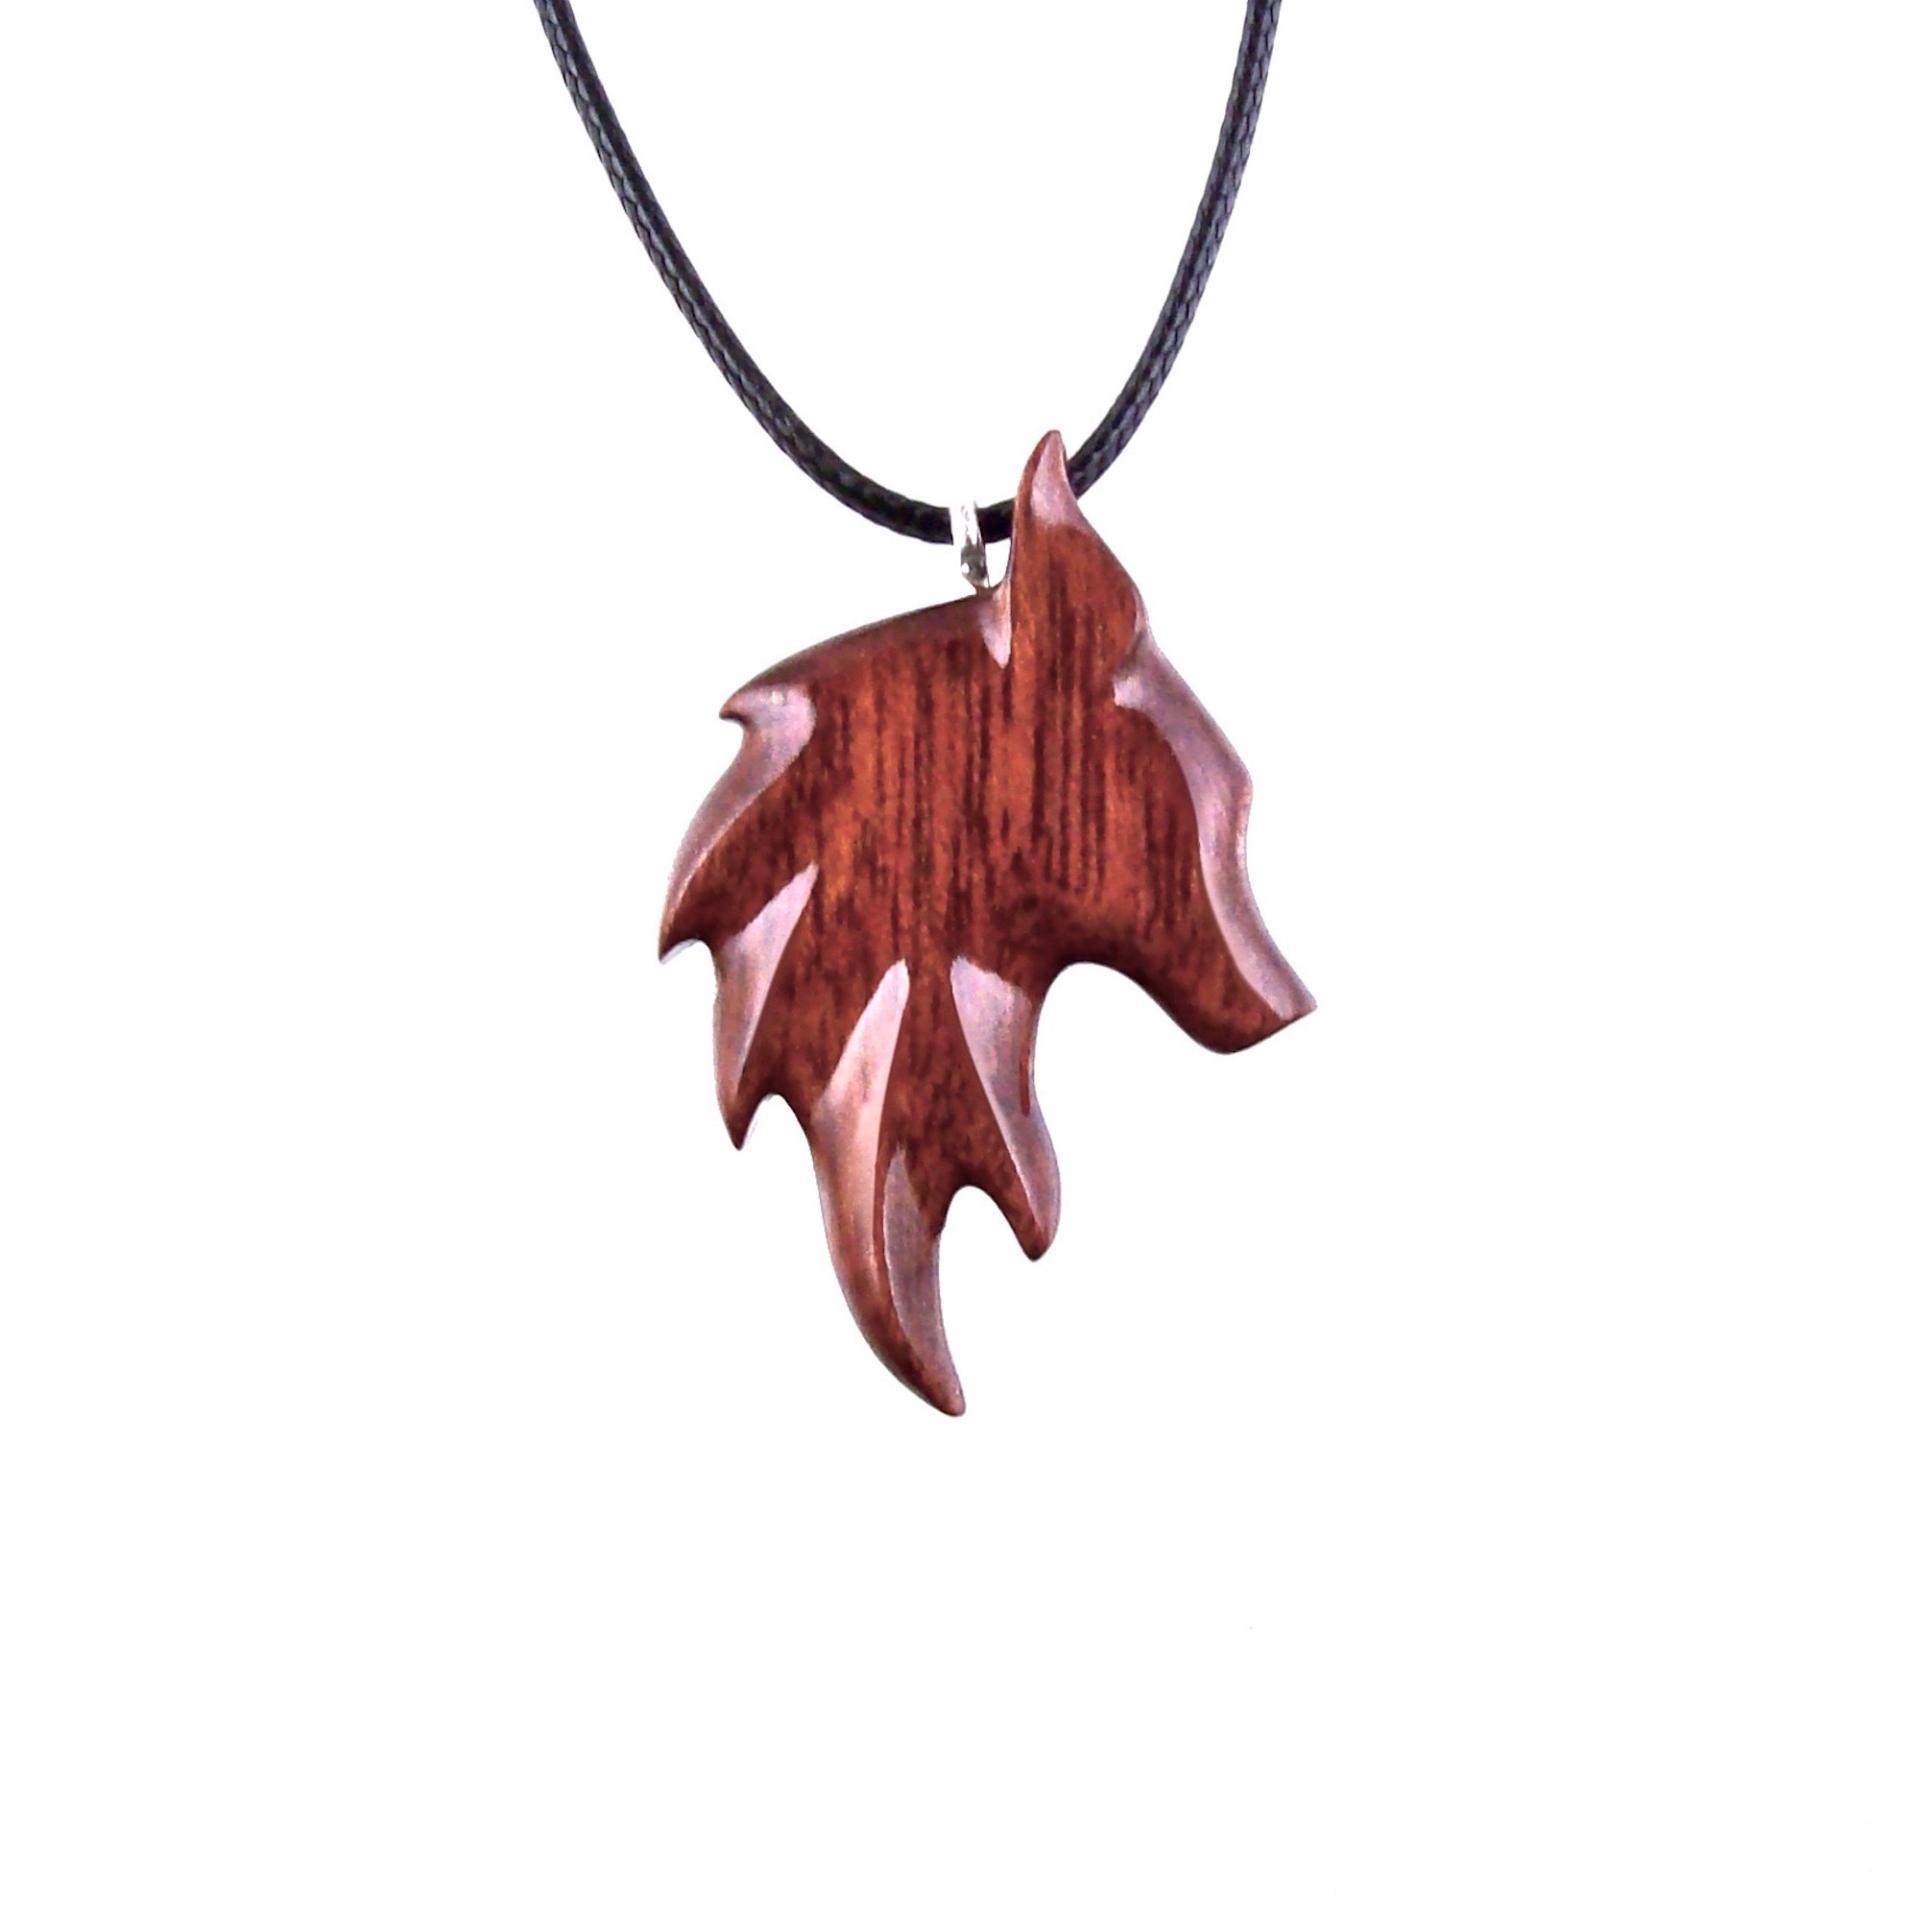 Wooden Fox Pendant, Hand Carved Fox Necklace, Woodland Pendant, Totem Spirit Animal Jewelry Gift for Men Women